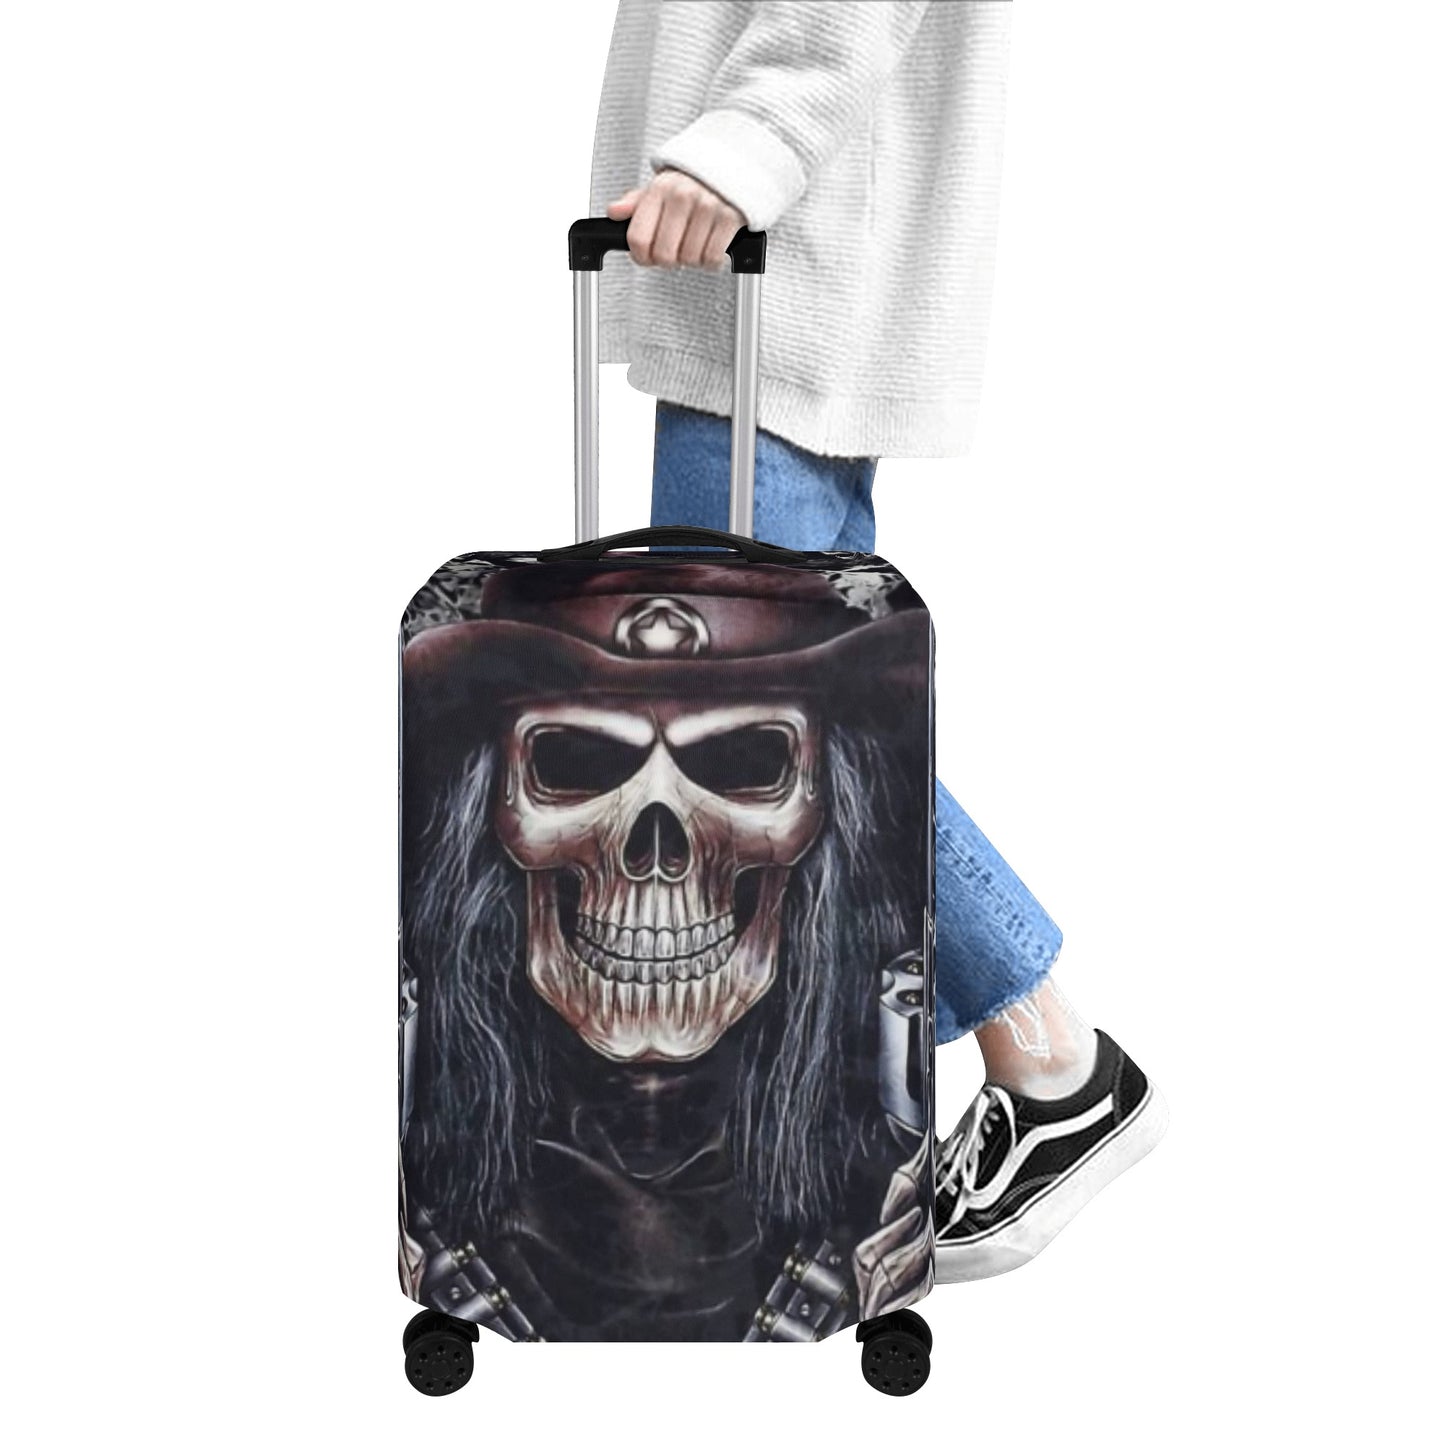 Gothic grim reaper skull luggage suitcase cover protector